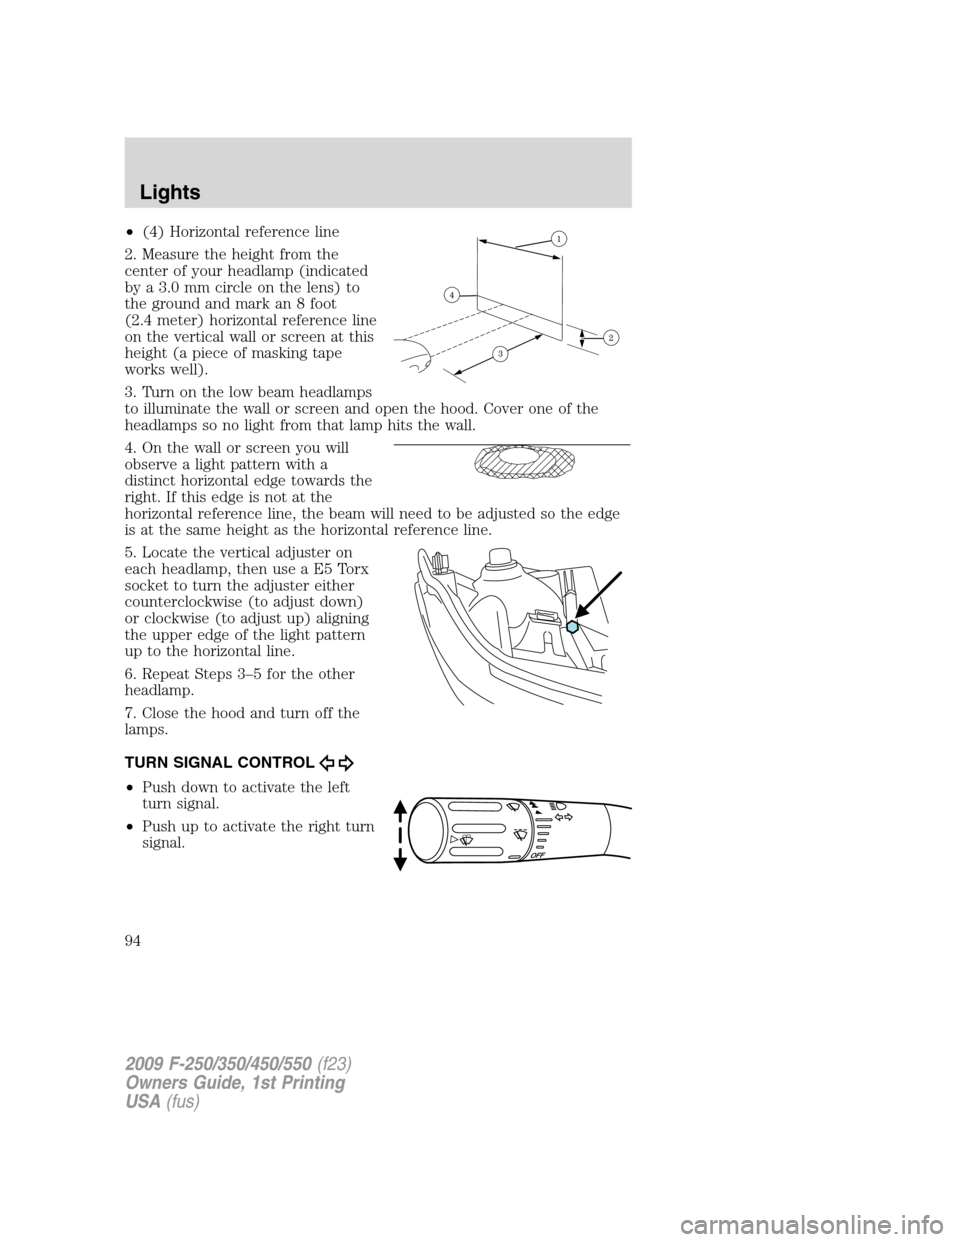 FORD SUPER DUTY 2009 2.G Owners Manual •(4) Horizontal reference line
2. Measure the height from the
center of your headlamp (indicated
by a 3.0 mm circle on the lens) to
the ground and mark an 8 foot
(2.4 meter) horizontal reference lin